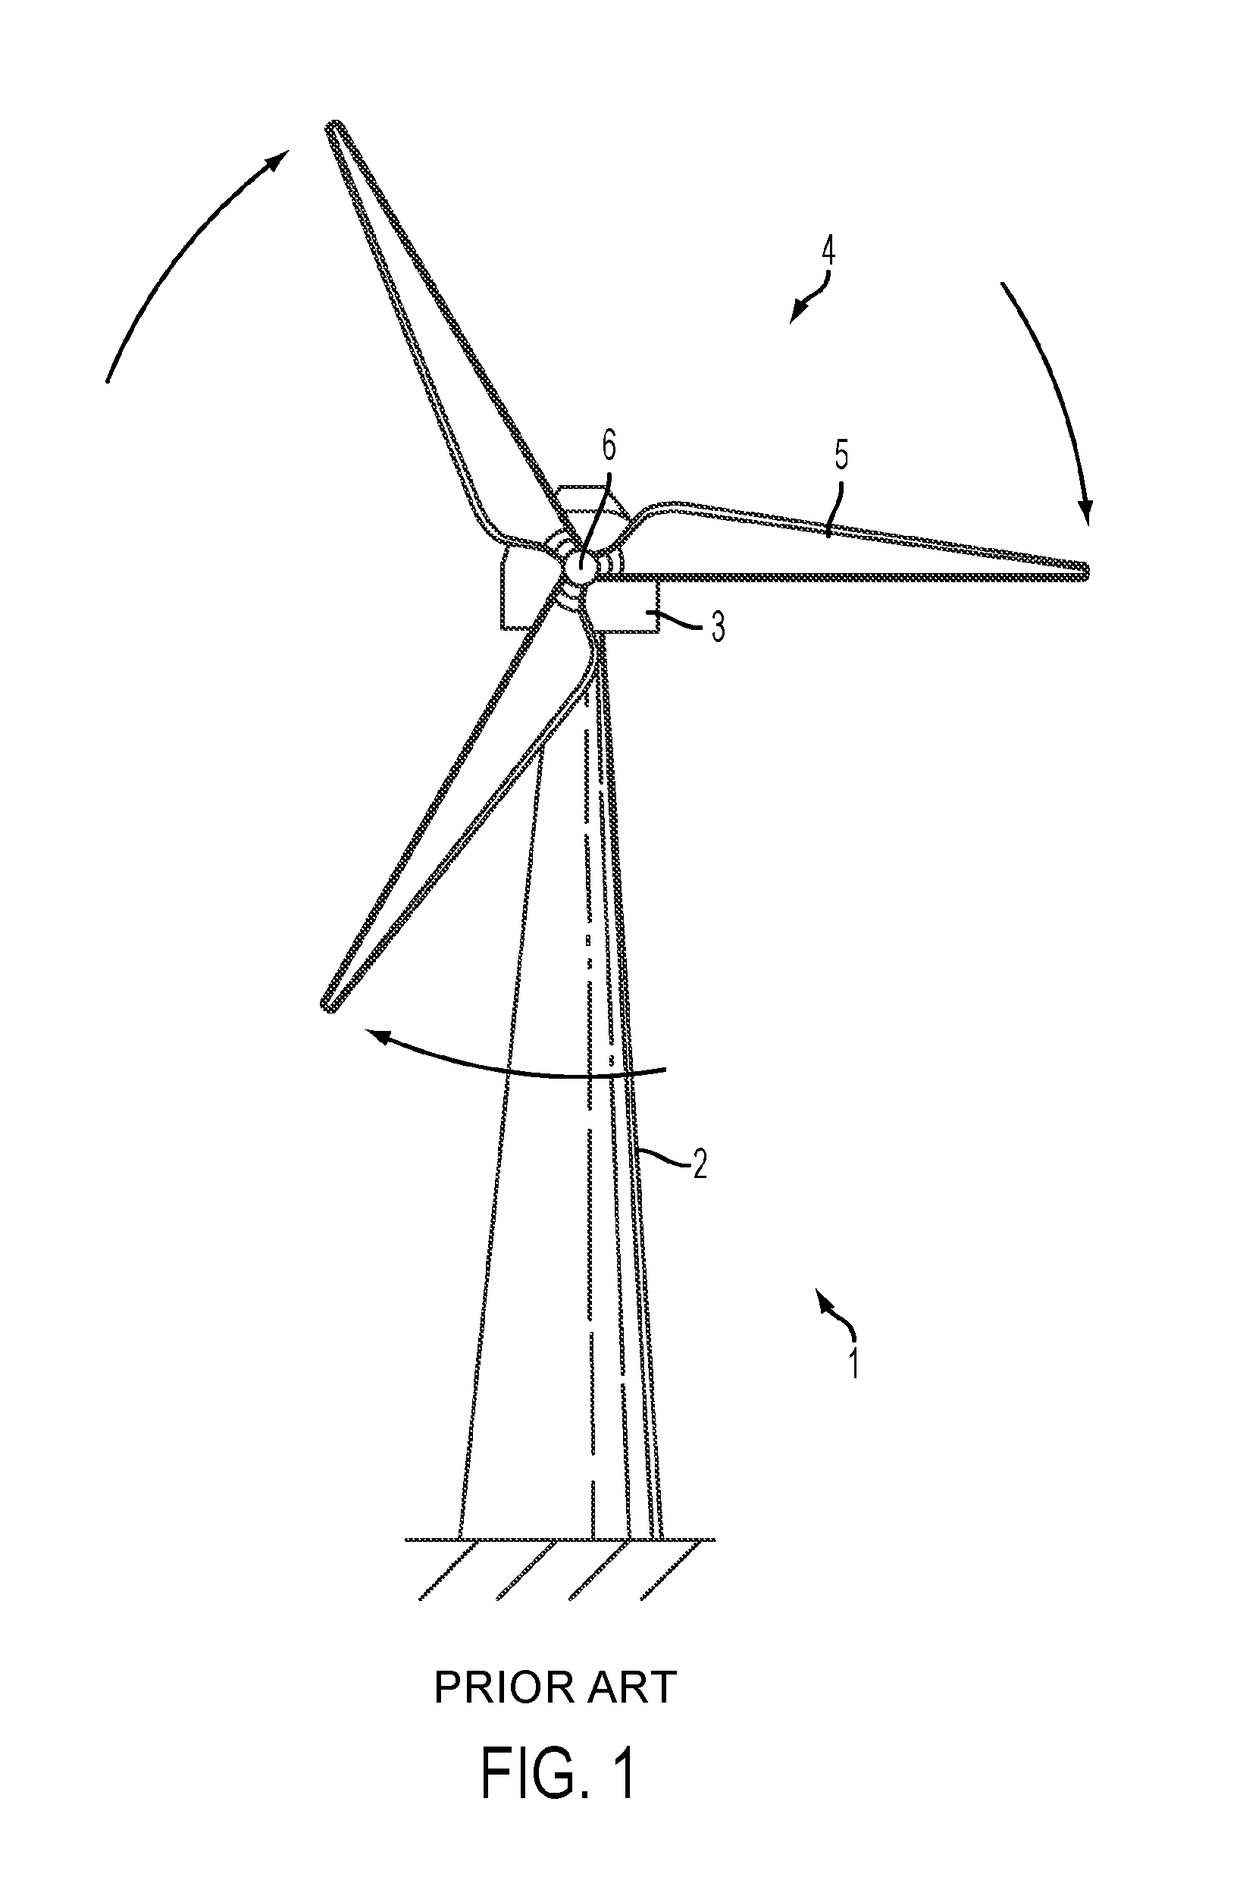 Method of yawing a rotor of a wind turbine